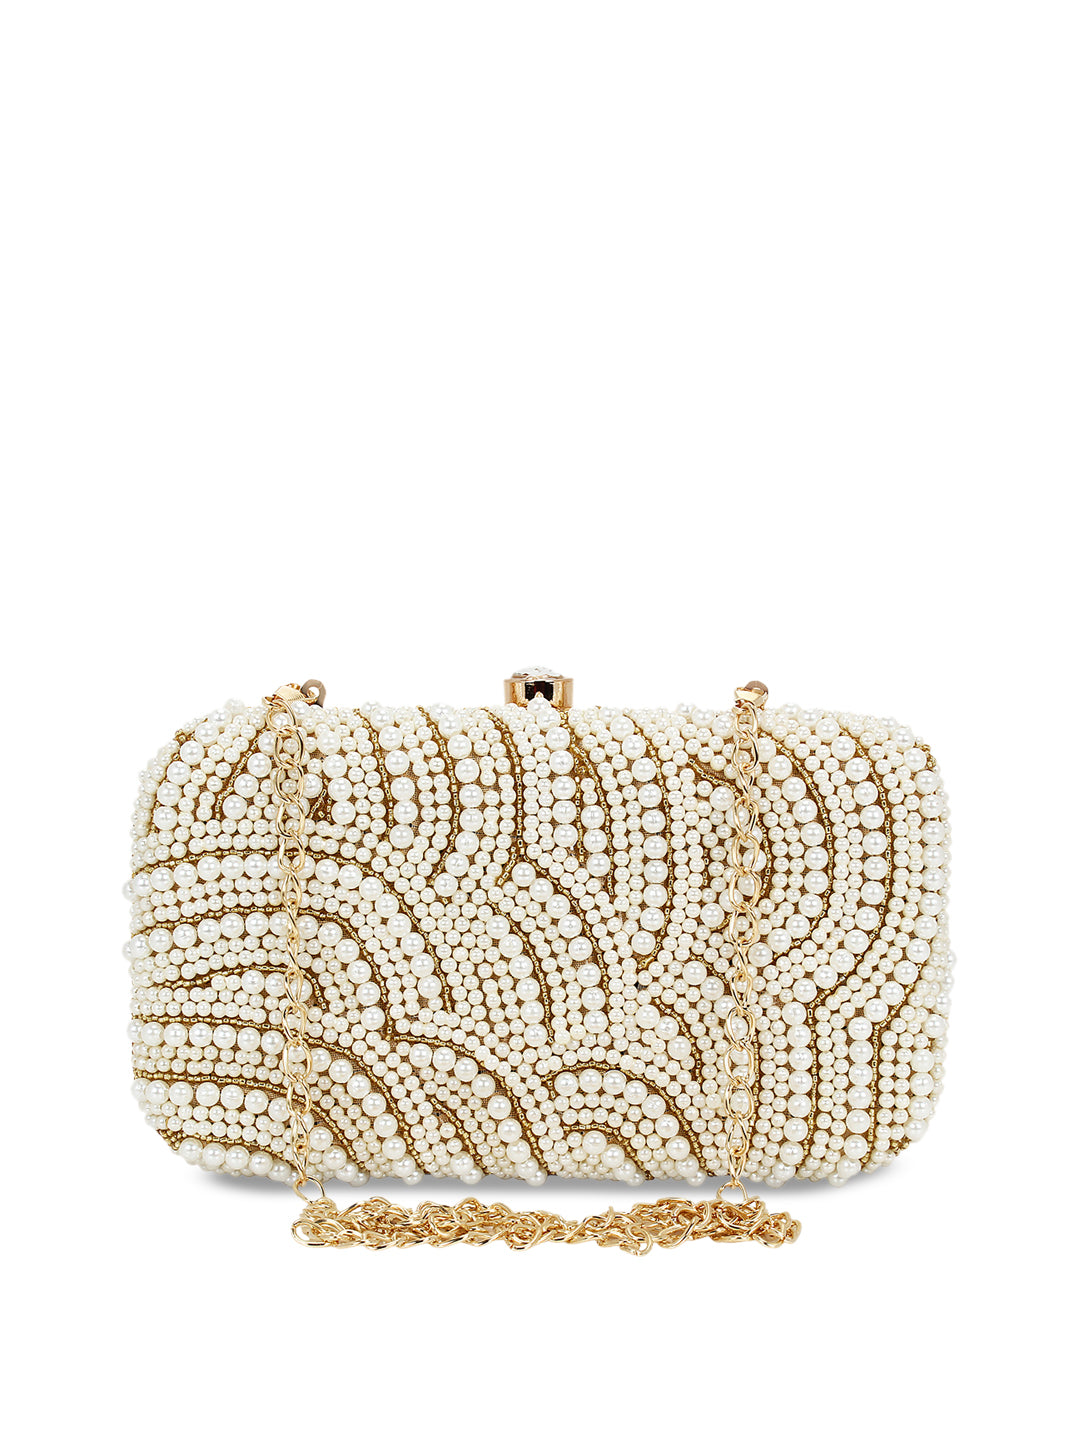 Women's White Color Adorn Embroidered & Embelished Party Clutch - VASTANS